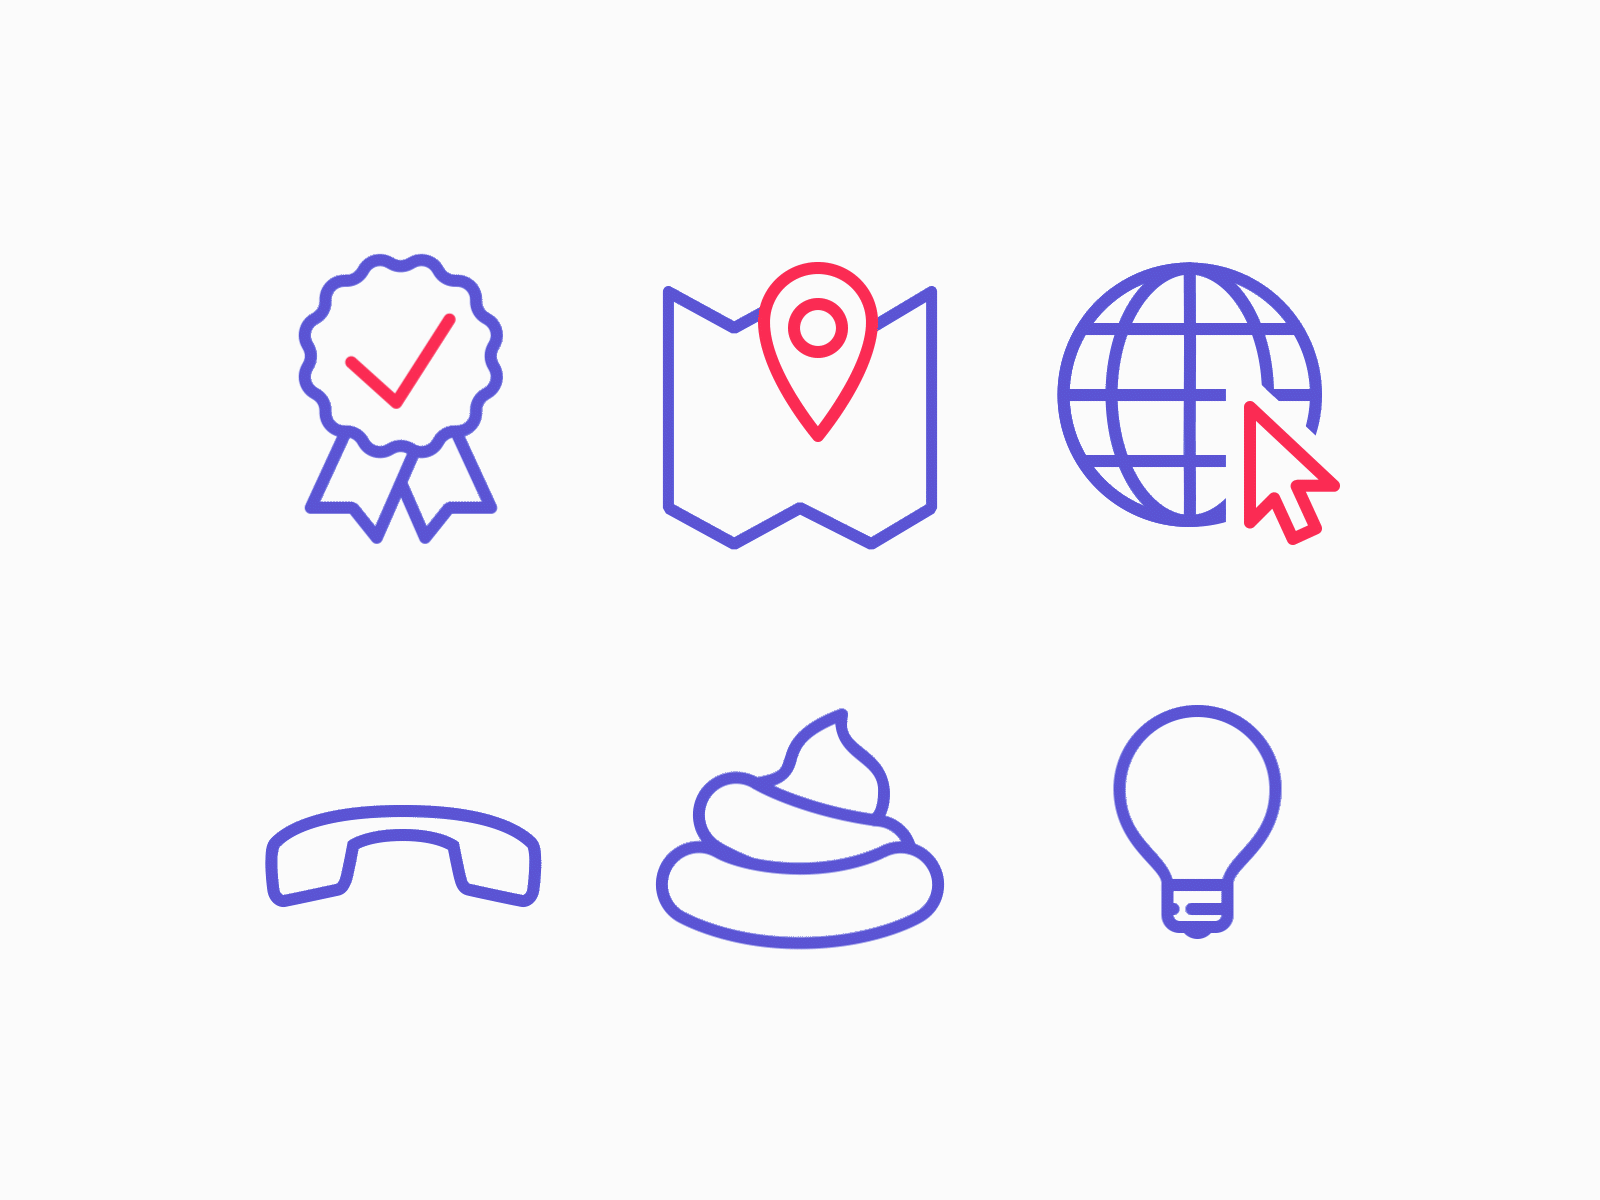 Animated icons iOS style animated animation animation 2d animation design badge design graphic design icons icons set illustration internet light bulb map motion design outline icon phone poo ui design ux design vector